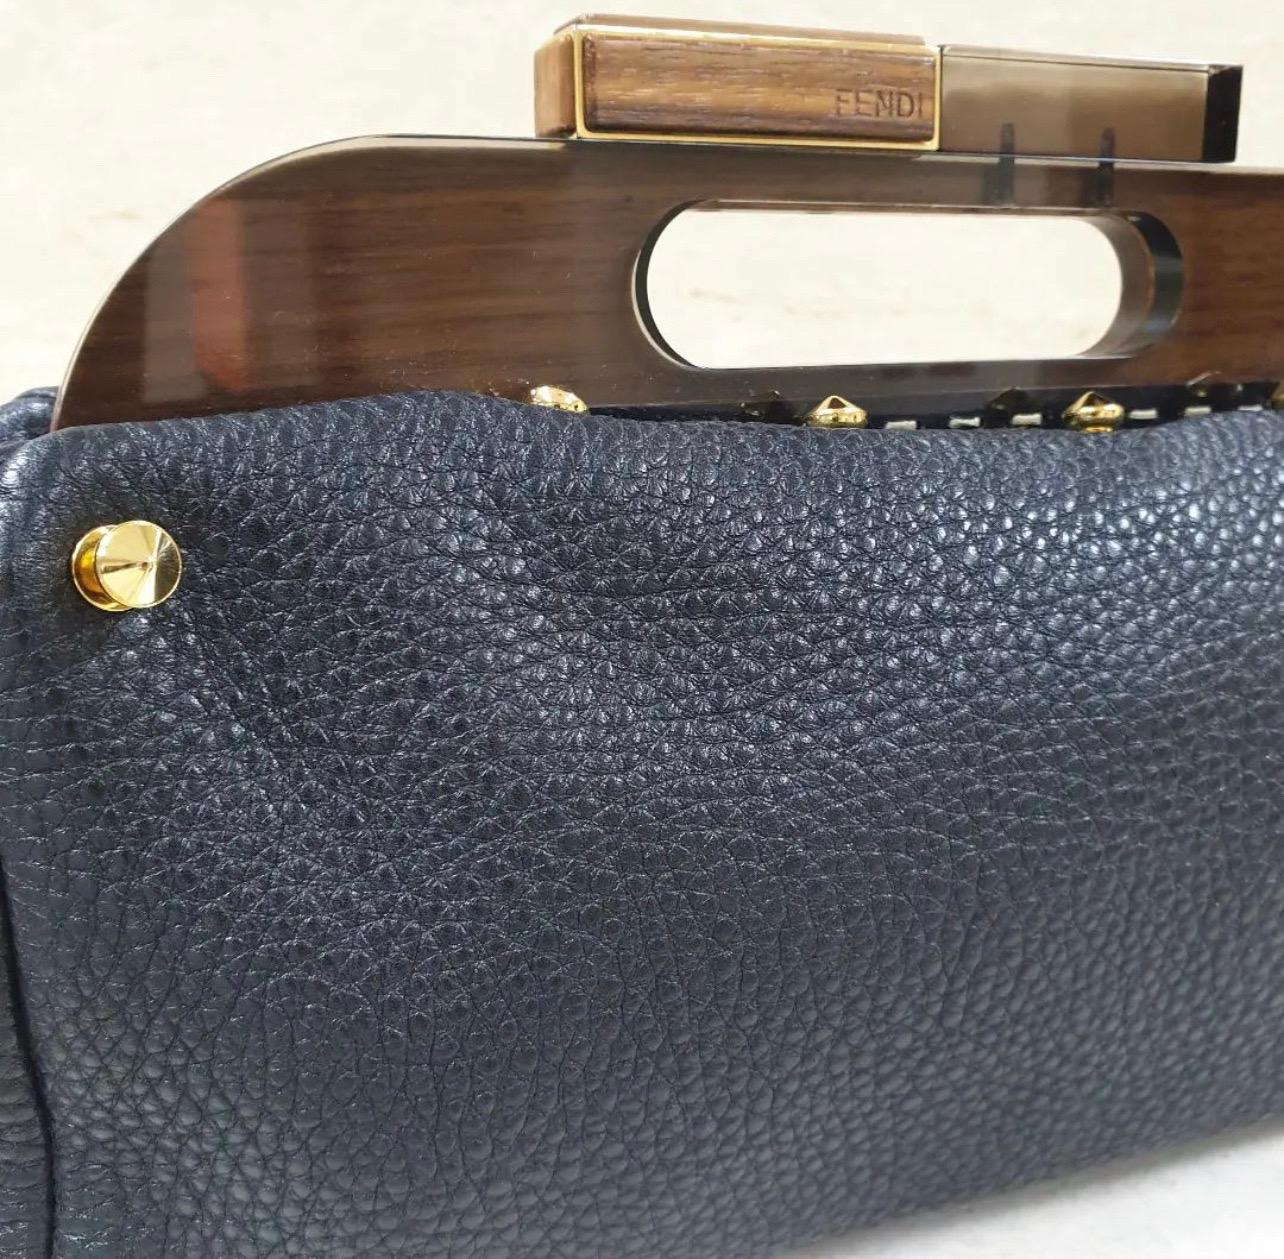 This sleek and vintage-inspired Fendi Black Leather Walnut Wood Handle Clutch Bag is the perfect accessory for going out or traveling light. The rounded profile gives this clutch an ultra-spacious interior and the wooden handle allows for easy